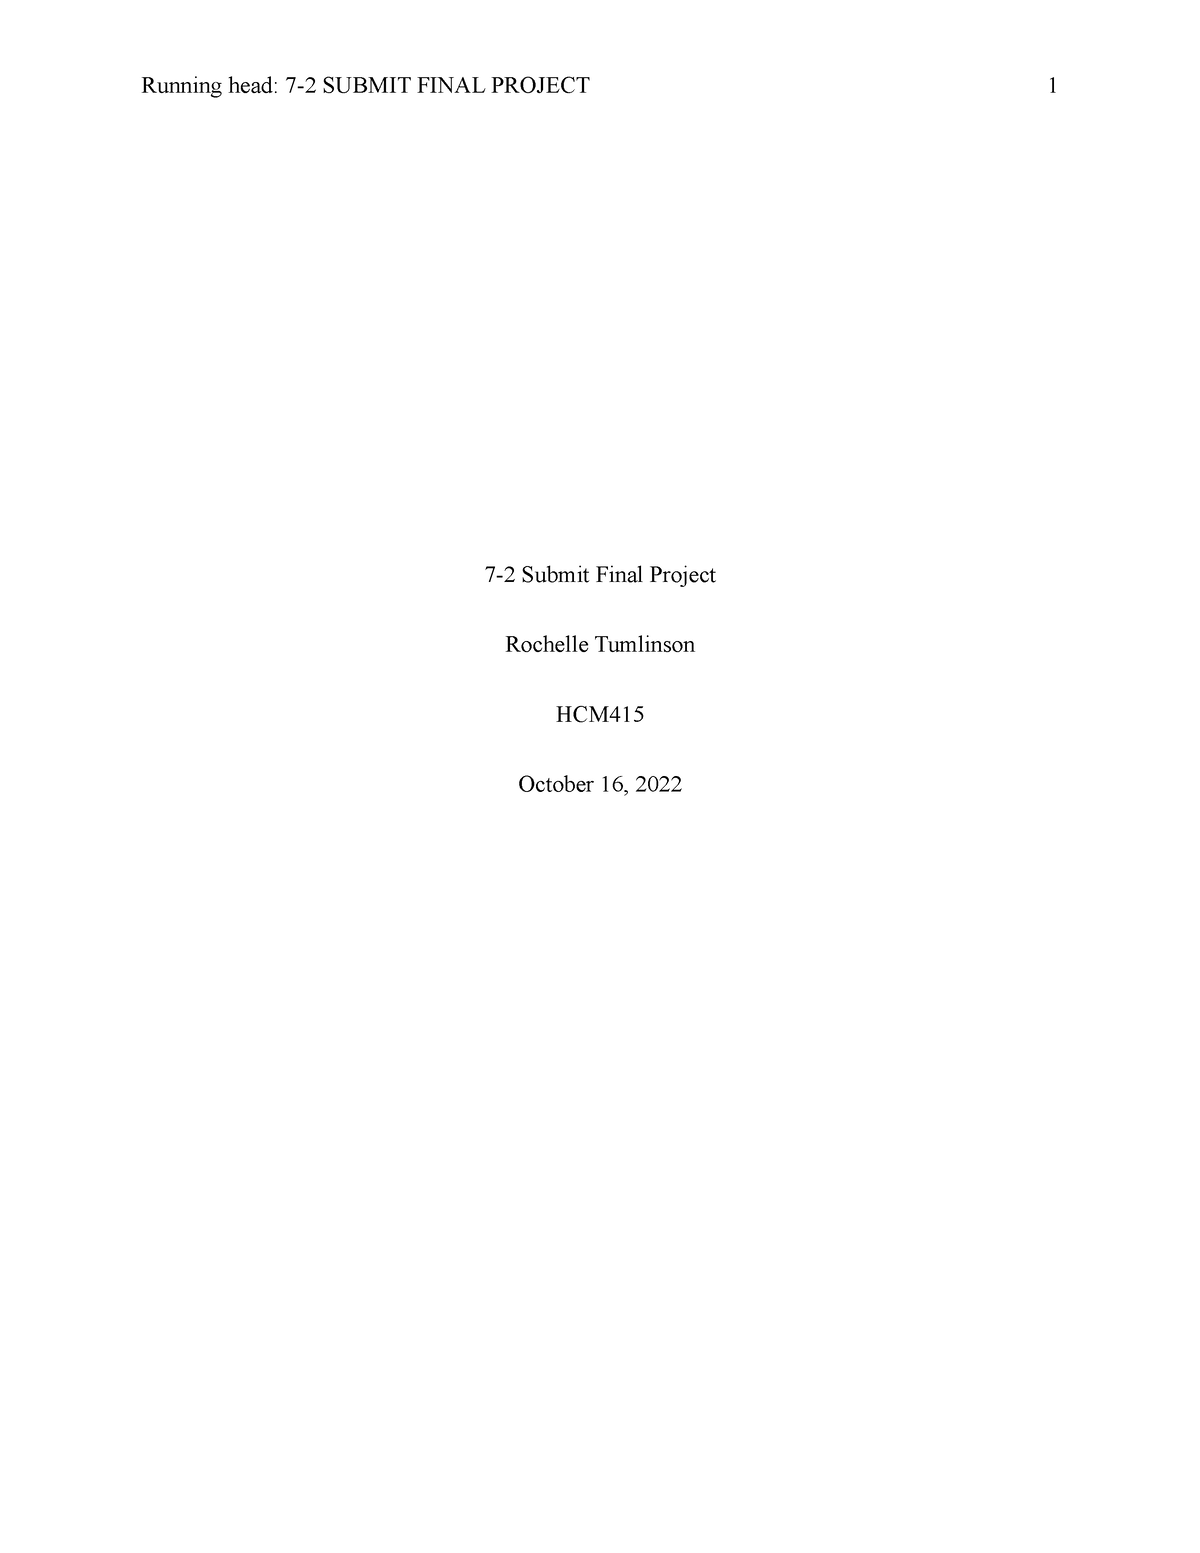 7-2 Submit Final Project - Running head: 7-2 SUBMIT FINAL PROJECT 1 7-2 ...